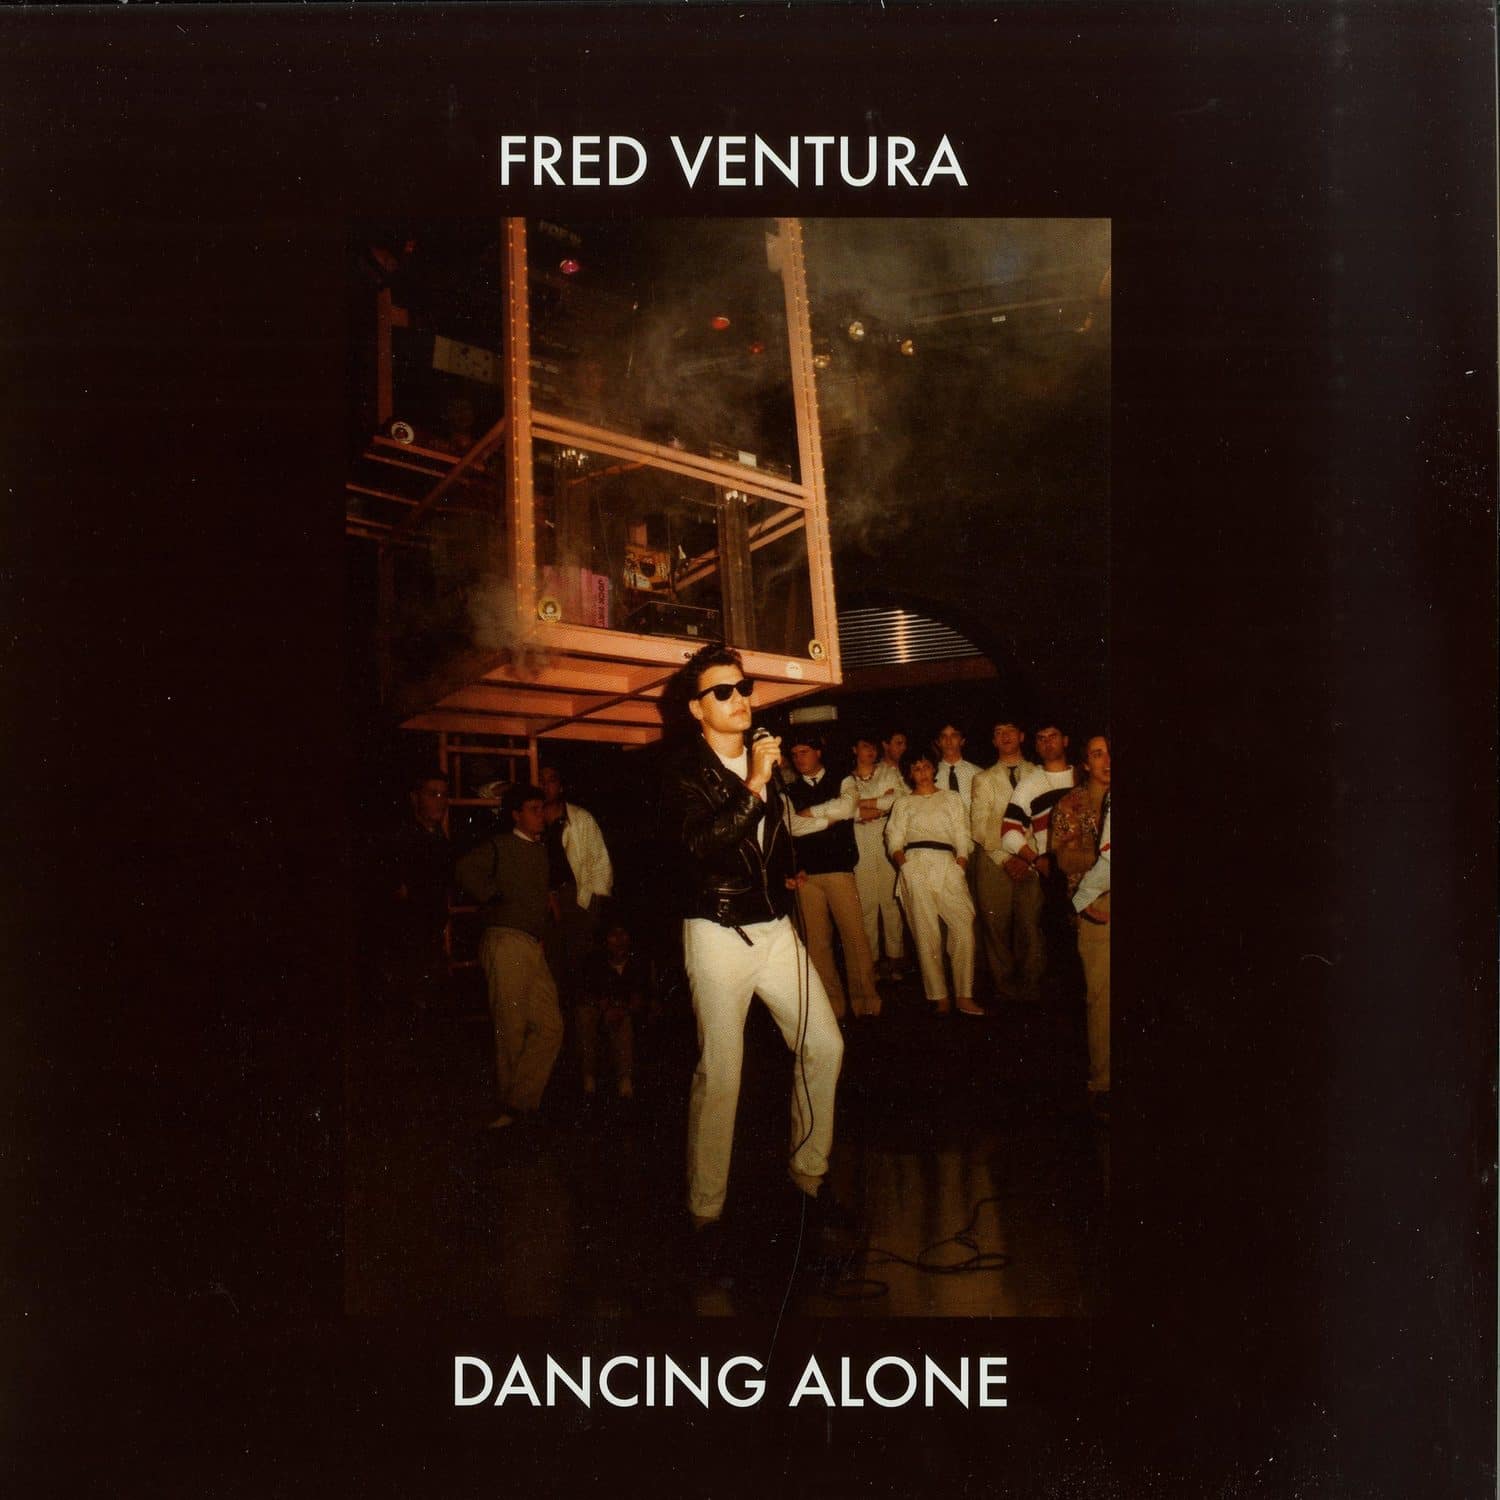 Fred Ventura - DANCING ALONE - DEMO TAPES FROM THE VAULTS 1982-1984 LP